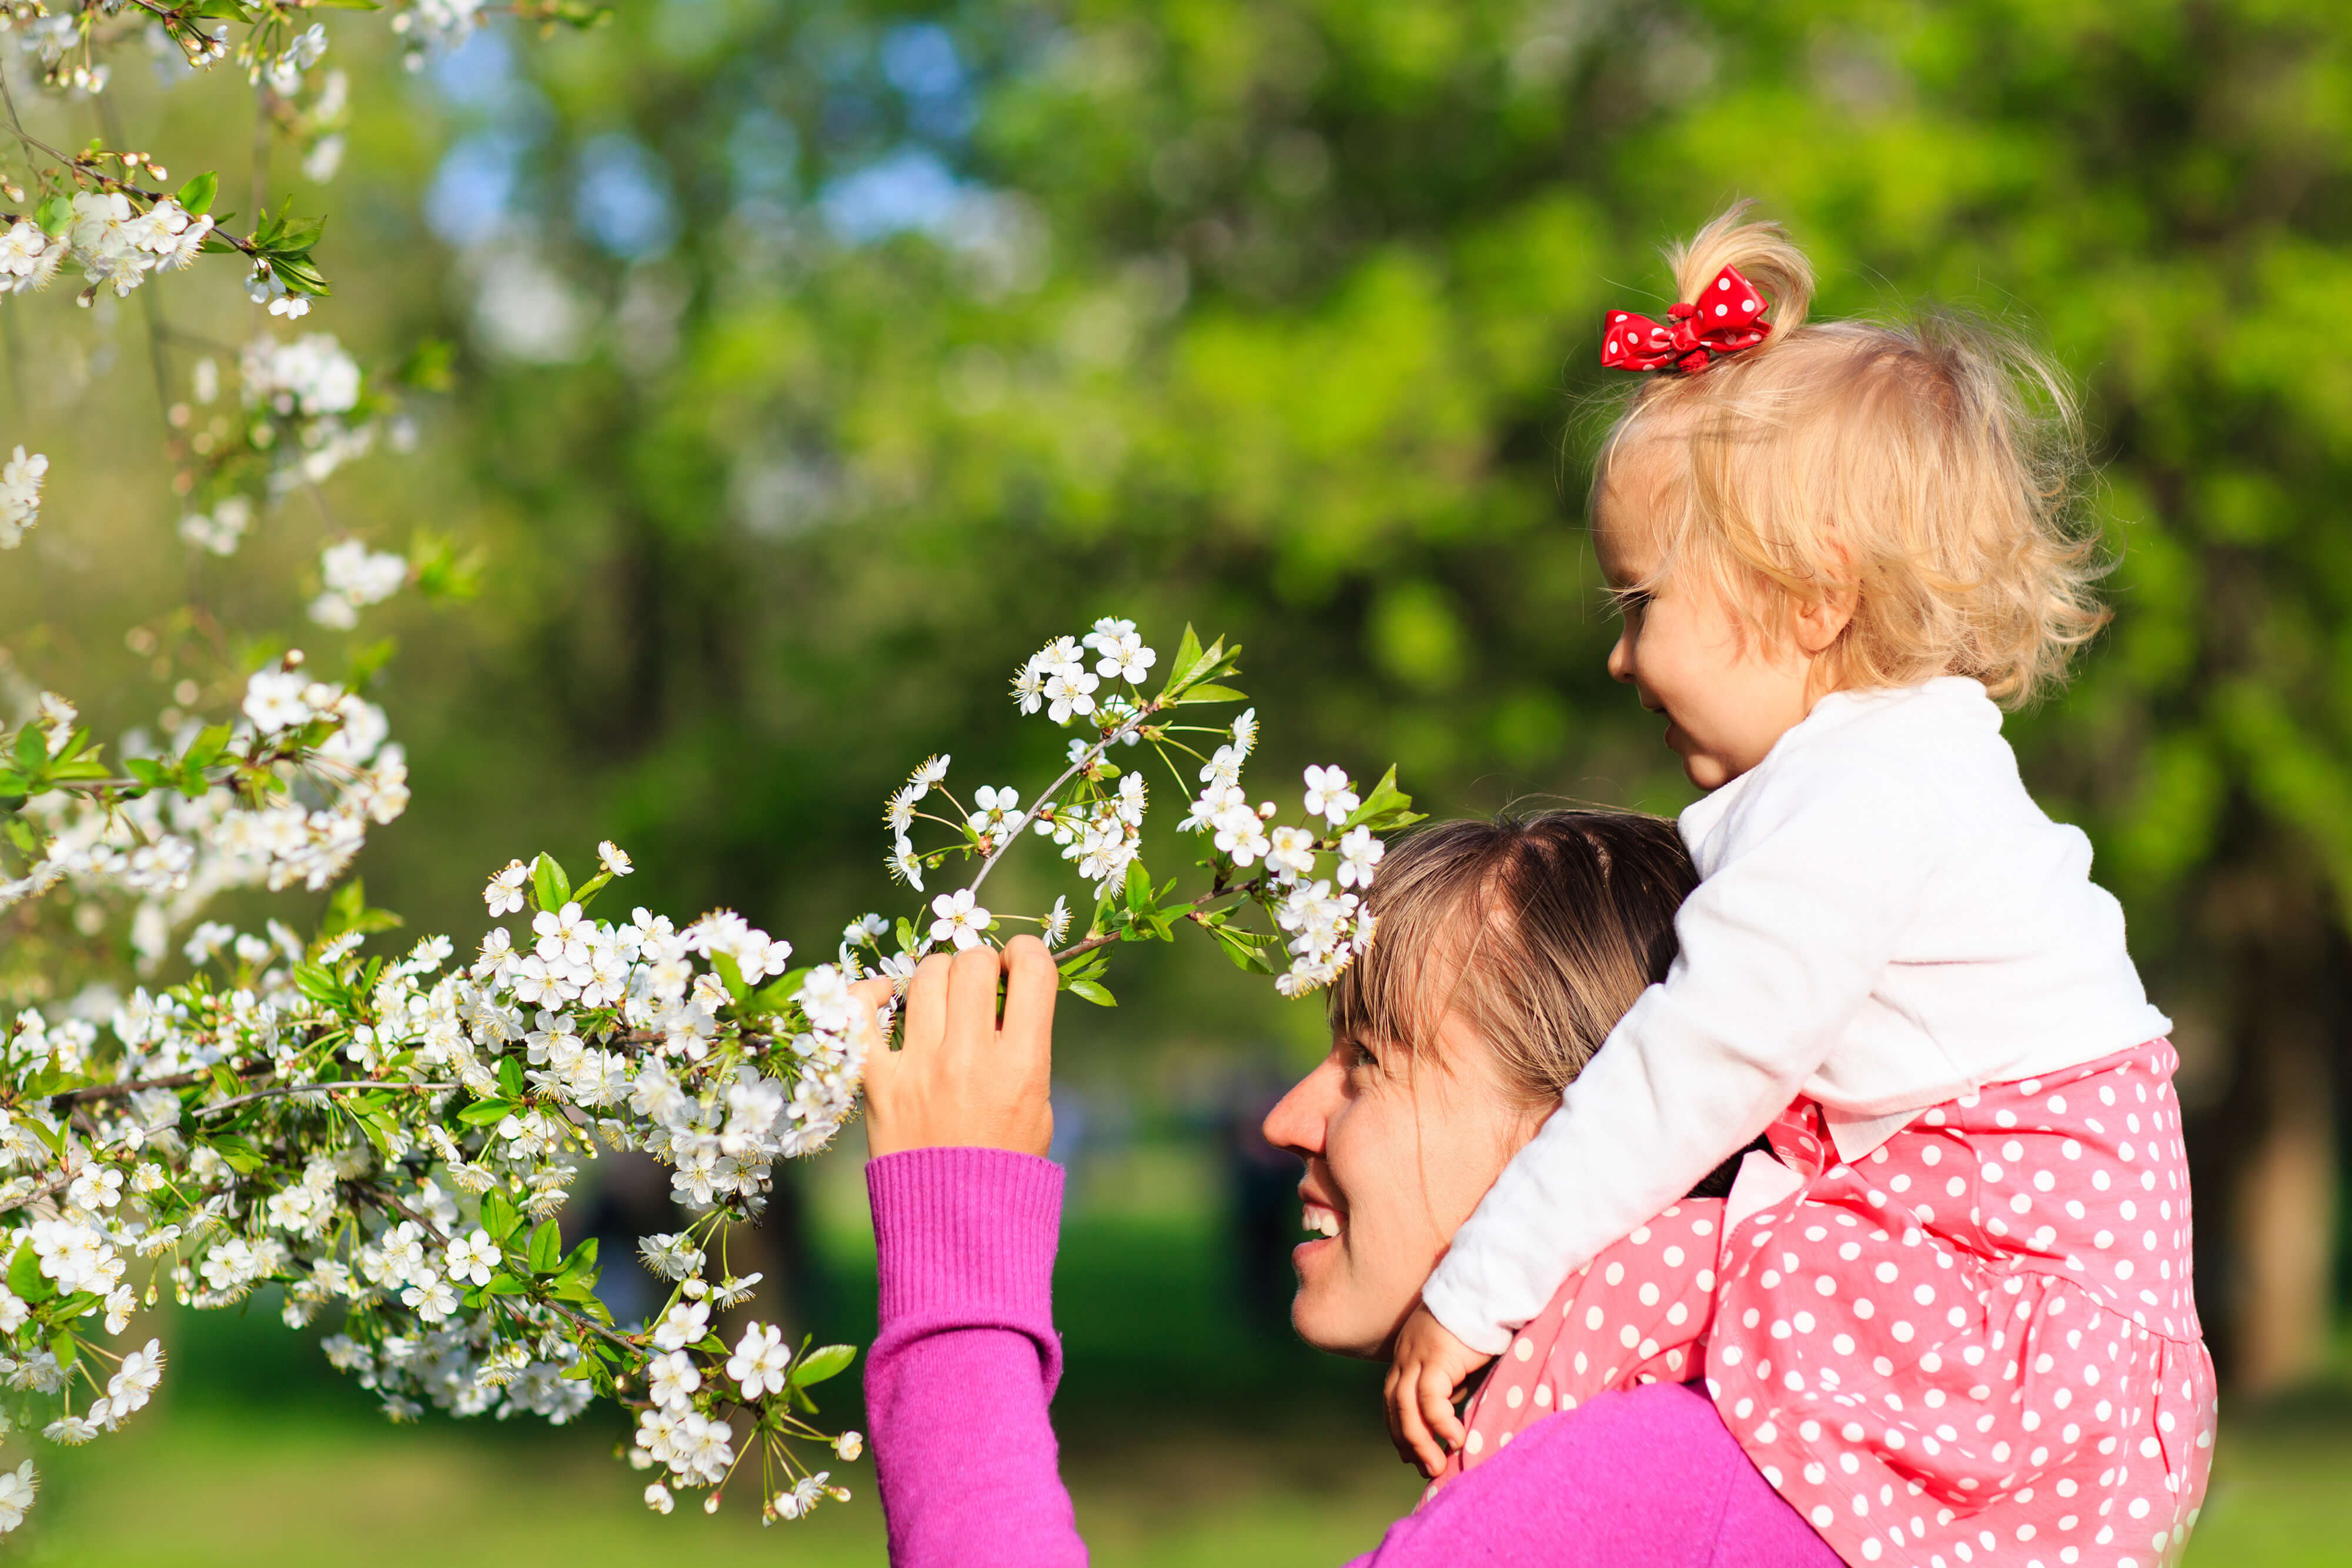 Woman and Child Picking Blossoms Off a Tree | Westgate Resorts